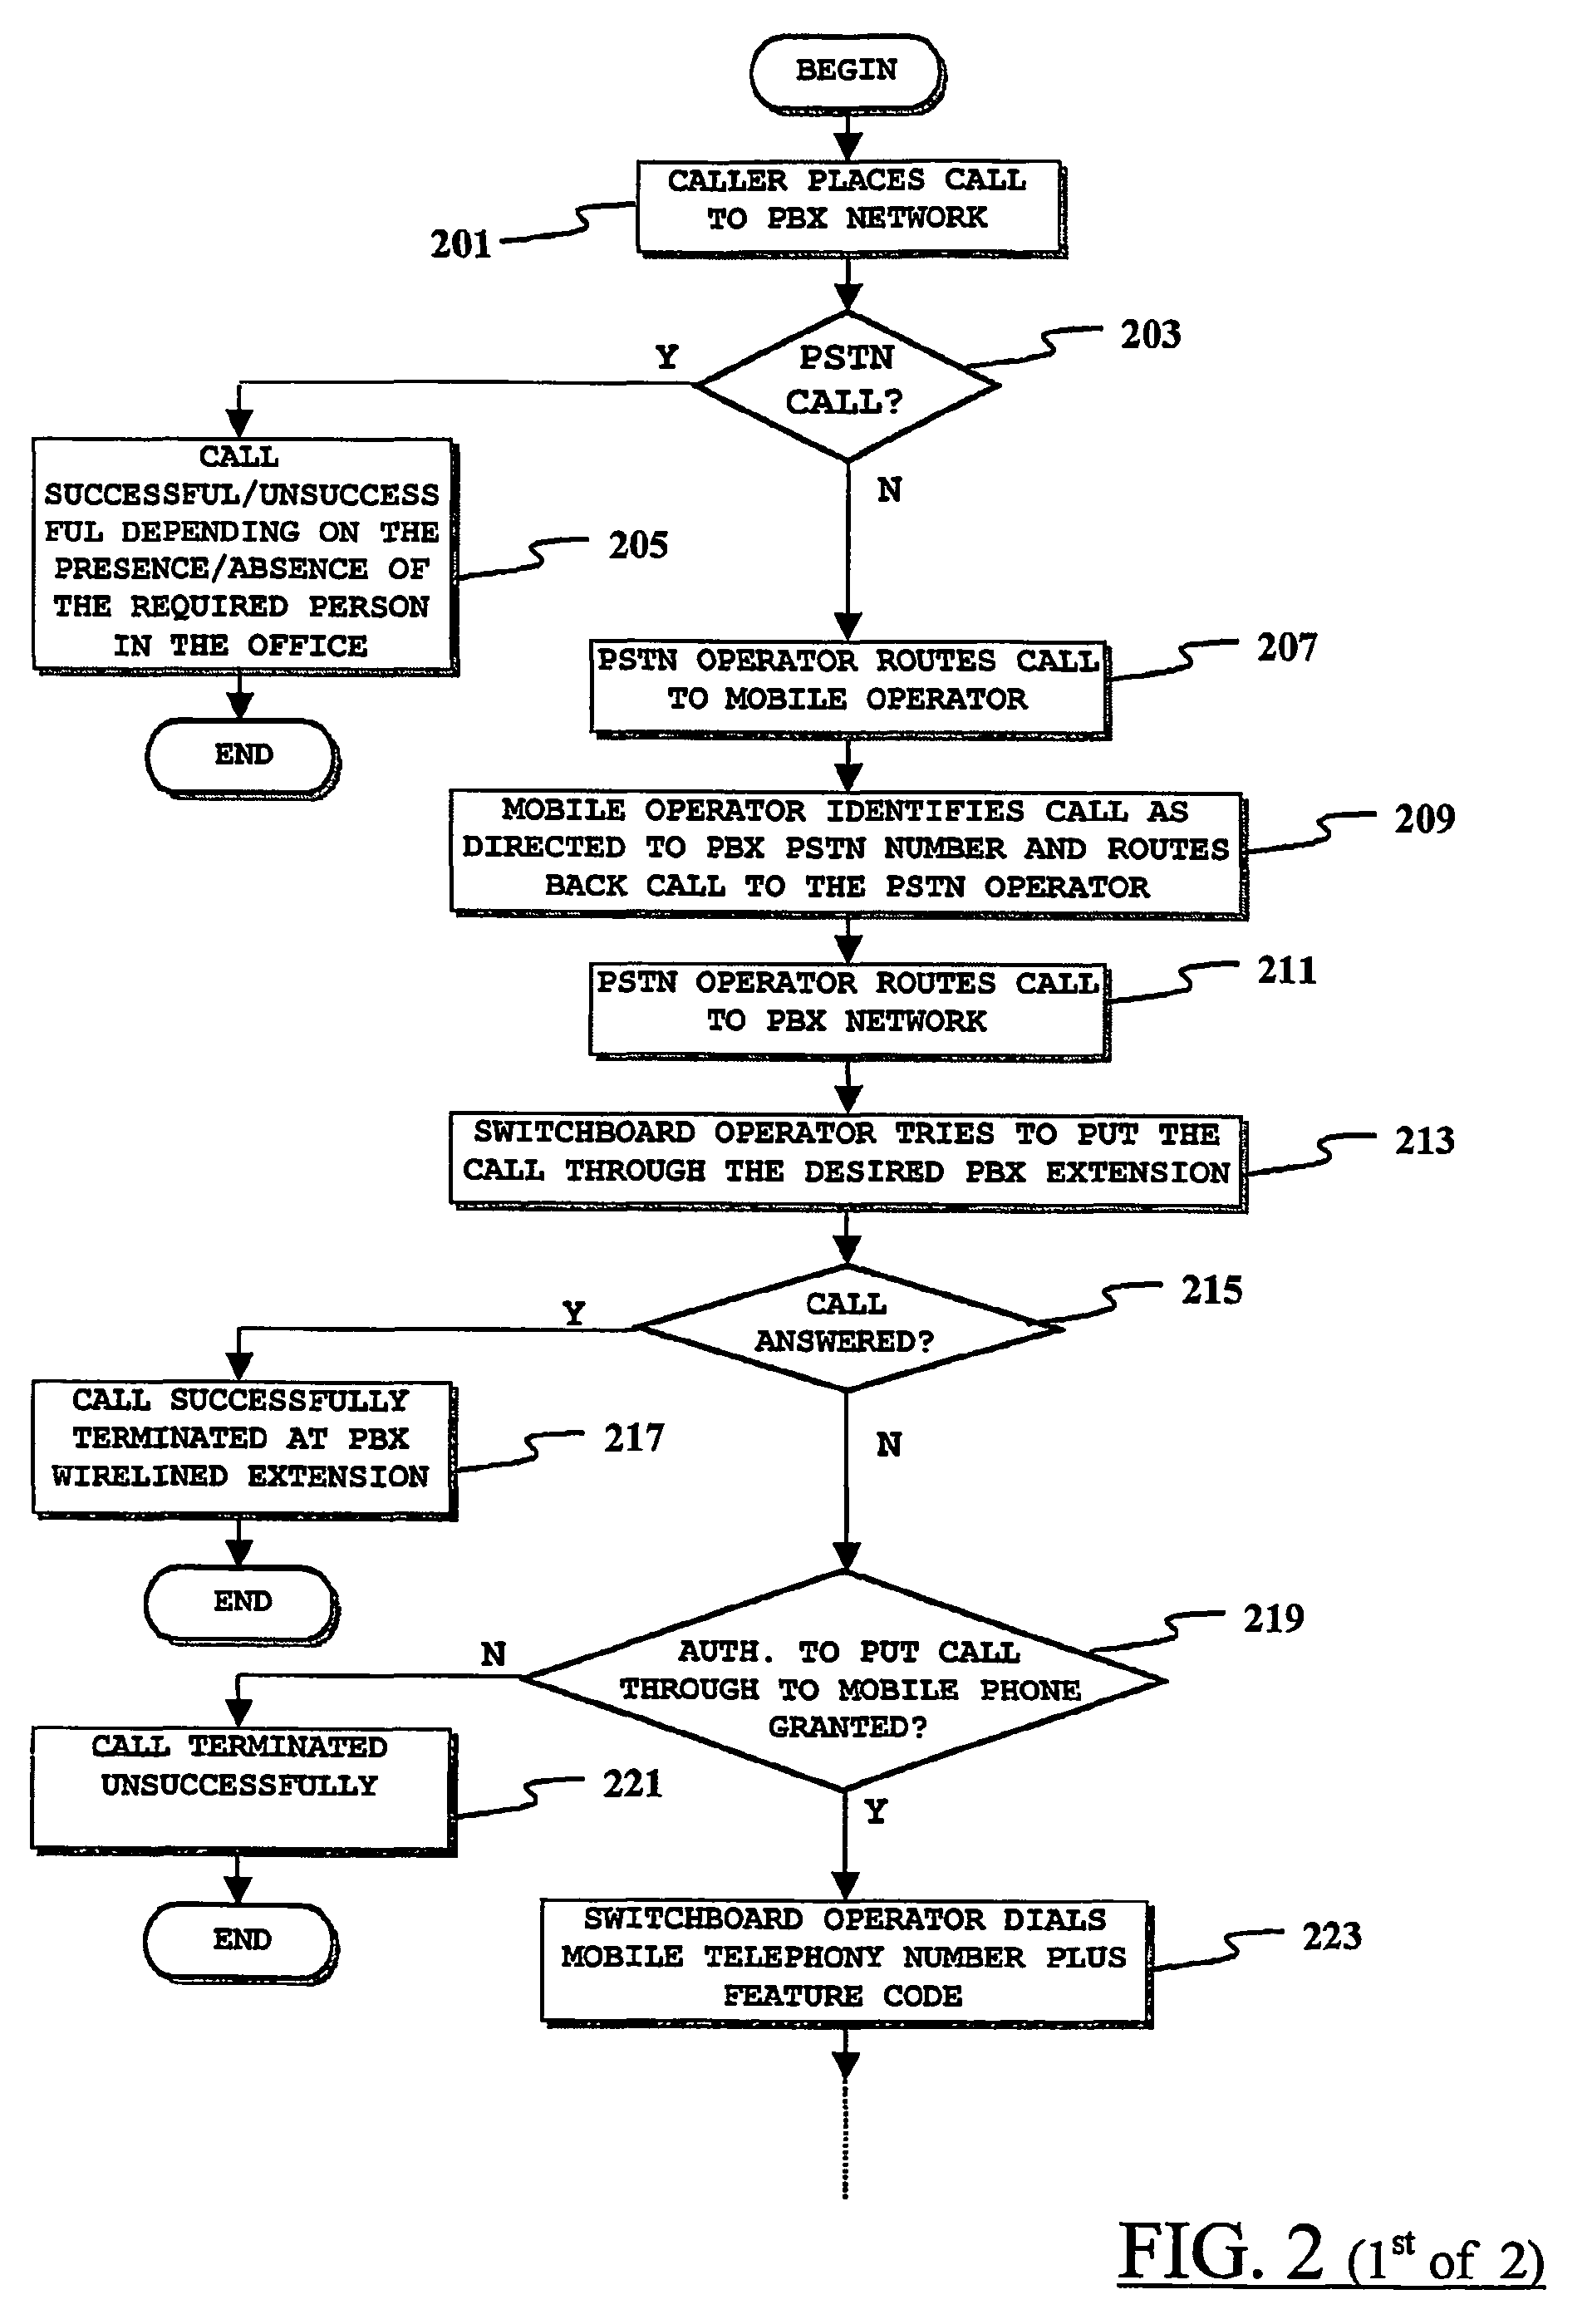 Method and system for call forwarding between a wireless switching apparatus and a fixed telephony network using a virtual number